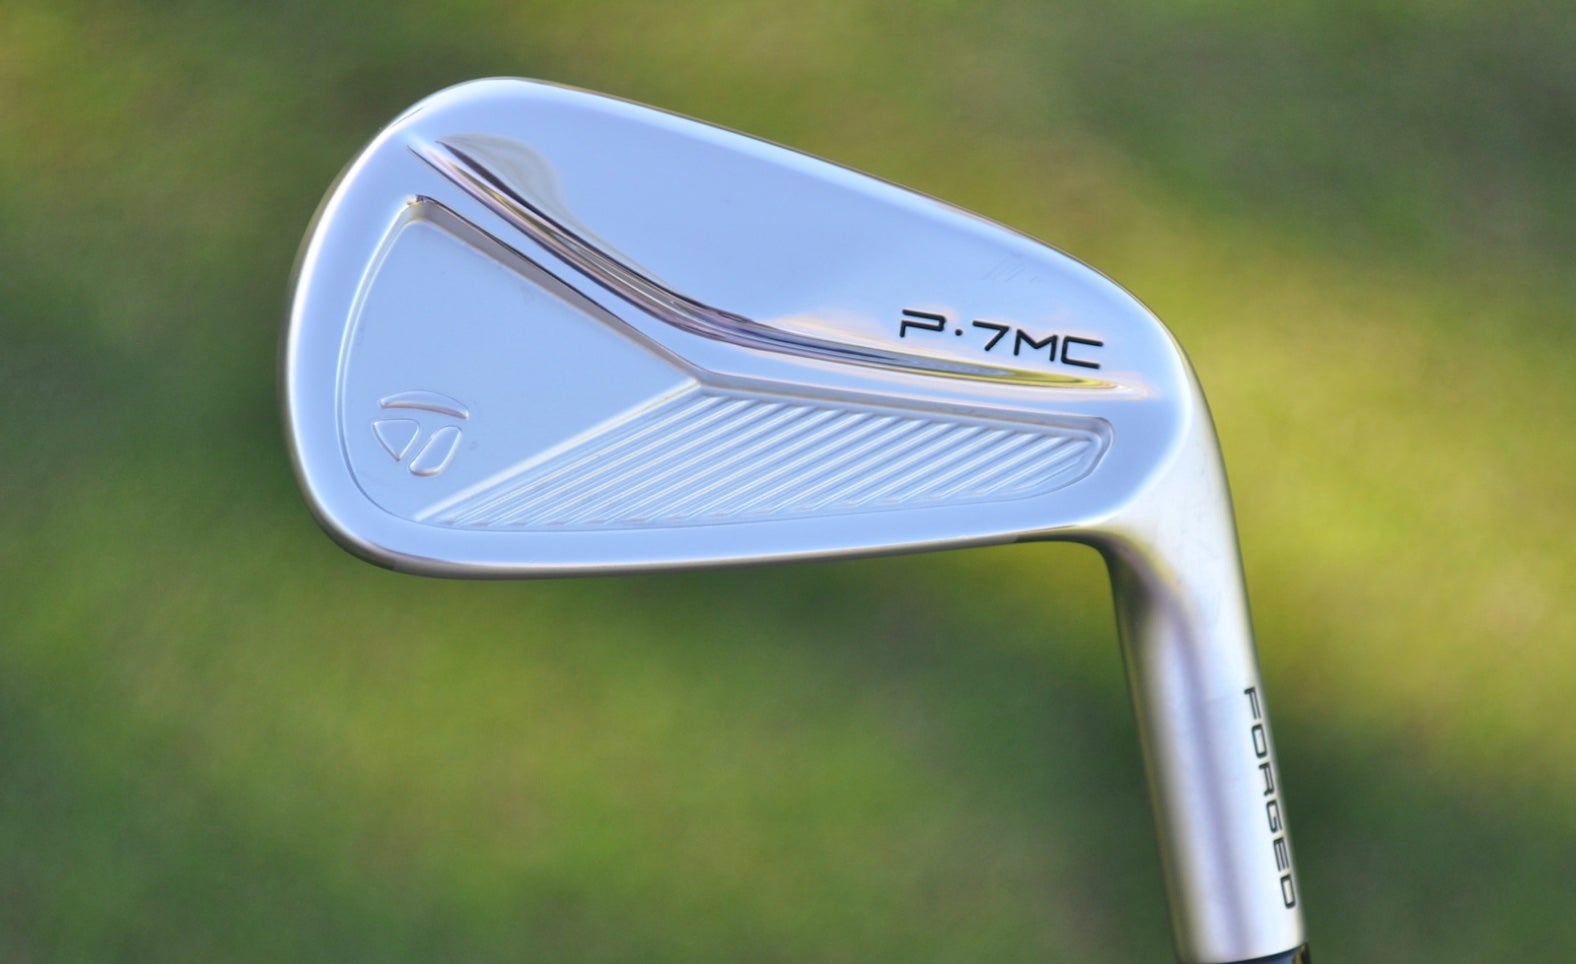 FIRST LOOK: 2023 TaylorMade P7MC and P7MB forged irons